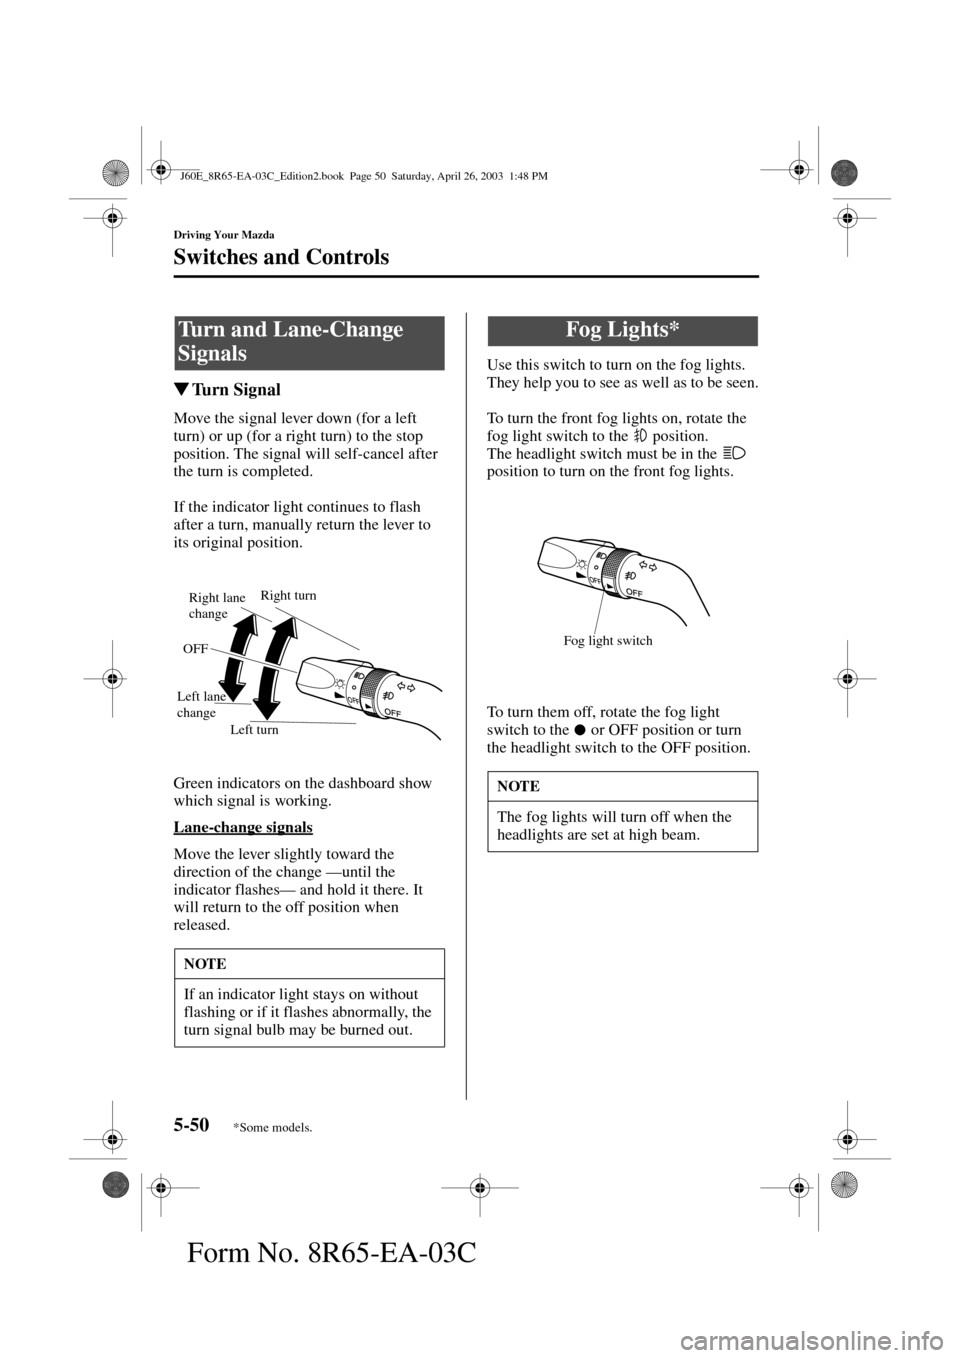 MAZDA MODEL RX 8 2004  Owners Manual (in English) 5-50
Driving Your Mazda
Switches and Controls
Form No. 8R65-EA-03C
Turn Signal
Move the signal lever down (for a left 
turn) or up (for a right turn) to the stop 
position. The signal will self-cance